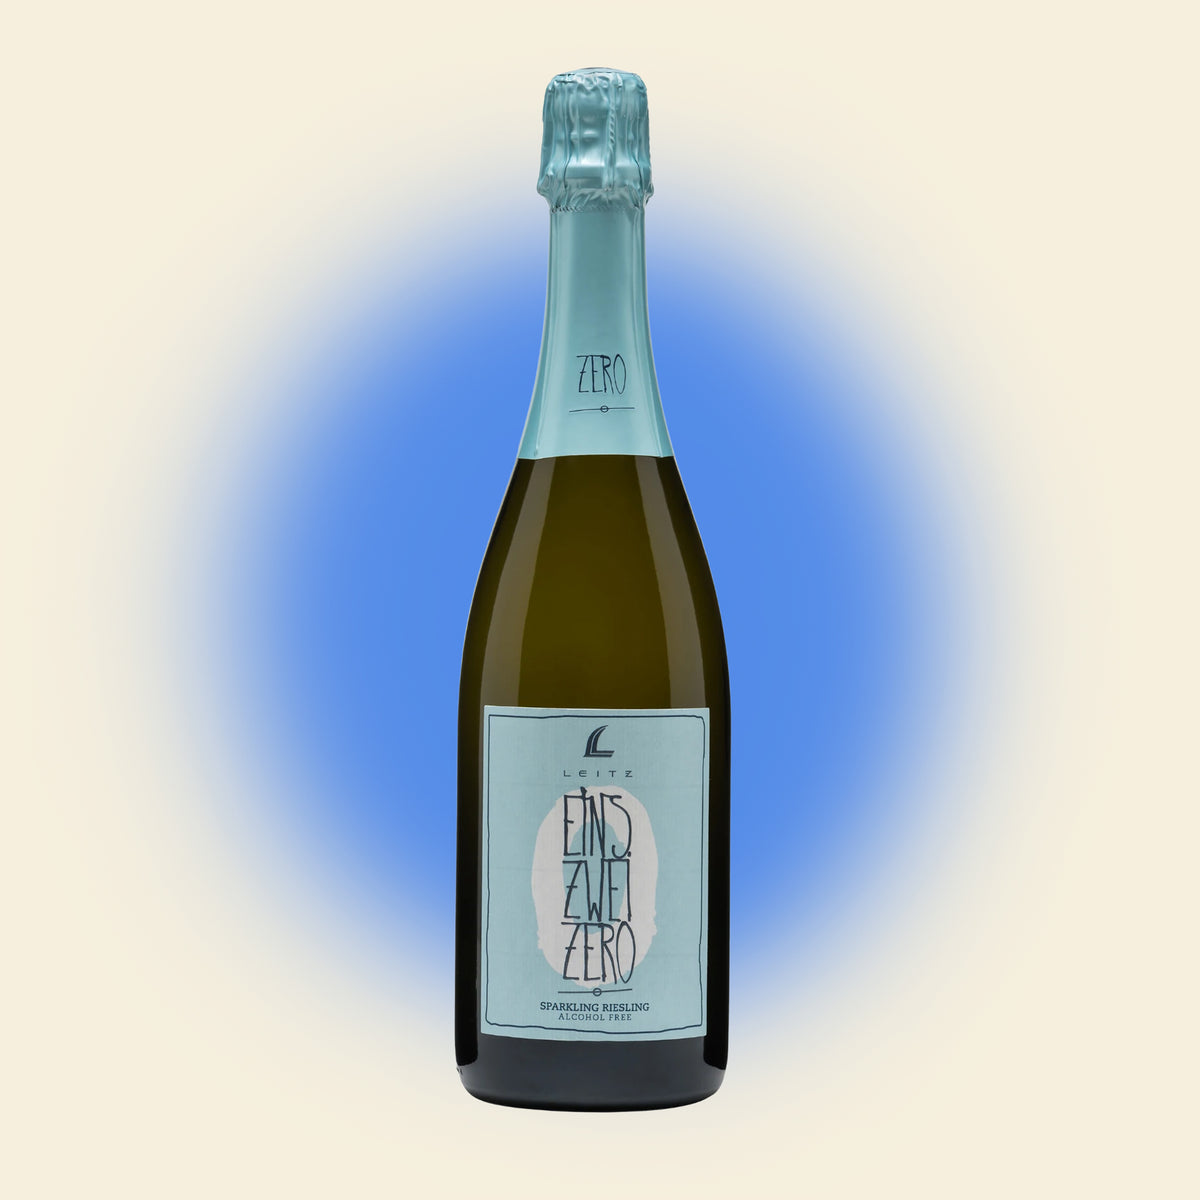 Leitz - Sparkling Riesling